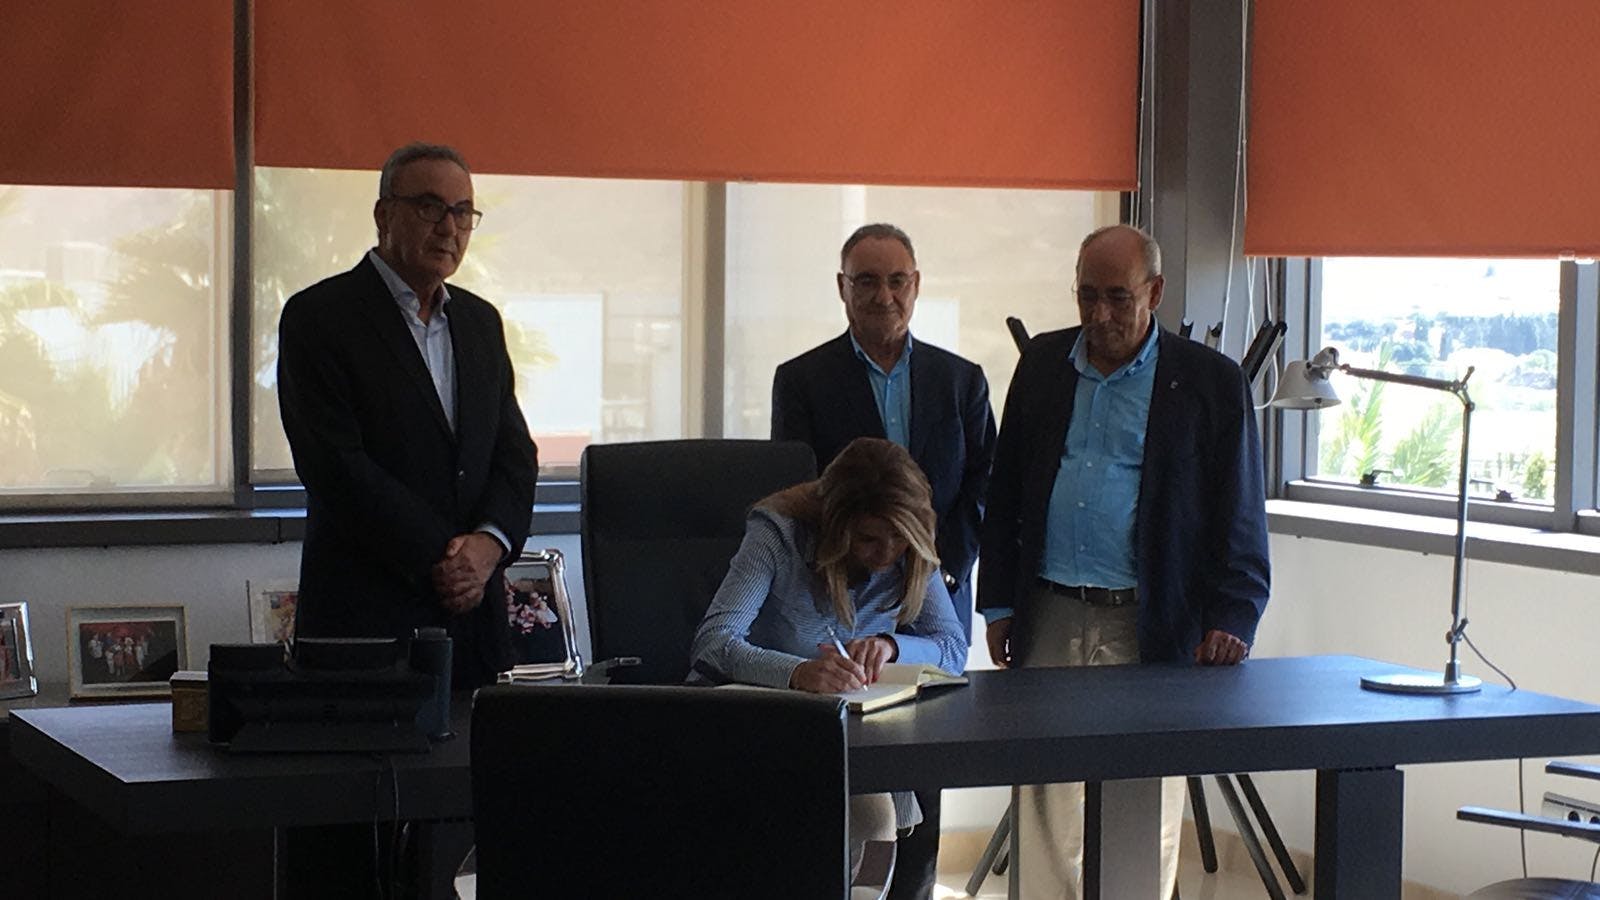 Image of Firma Susana Diaz in Susana Díaz praises Cosentino Group's focus on innovation and professional training - Cosentino